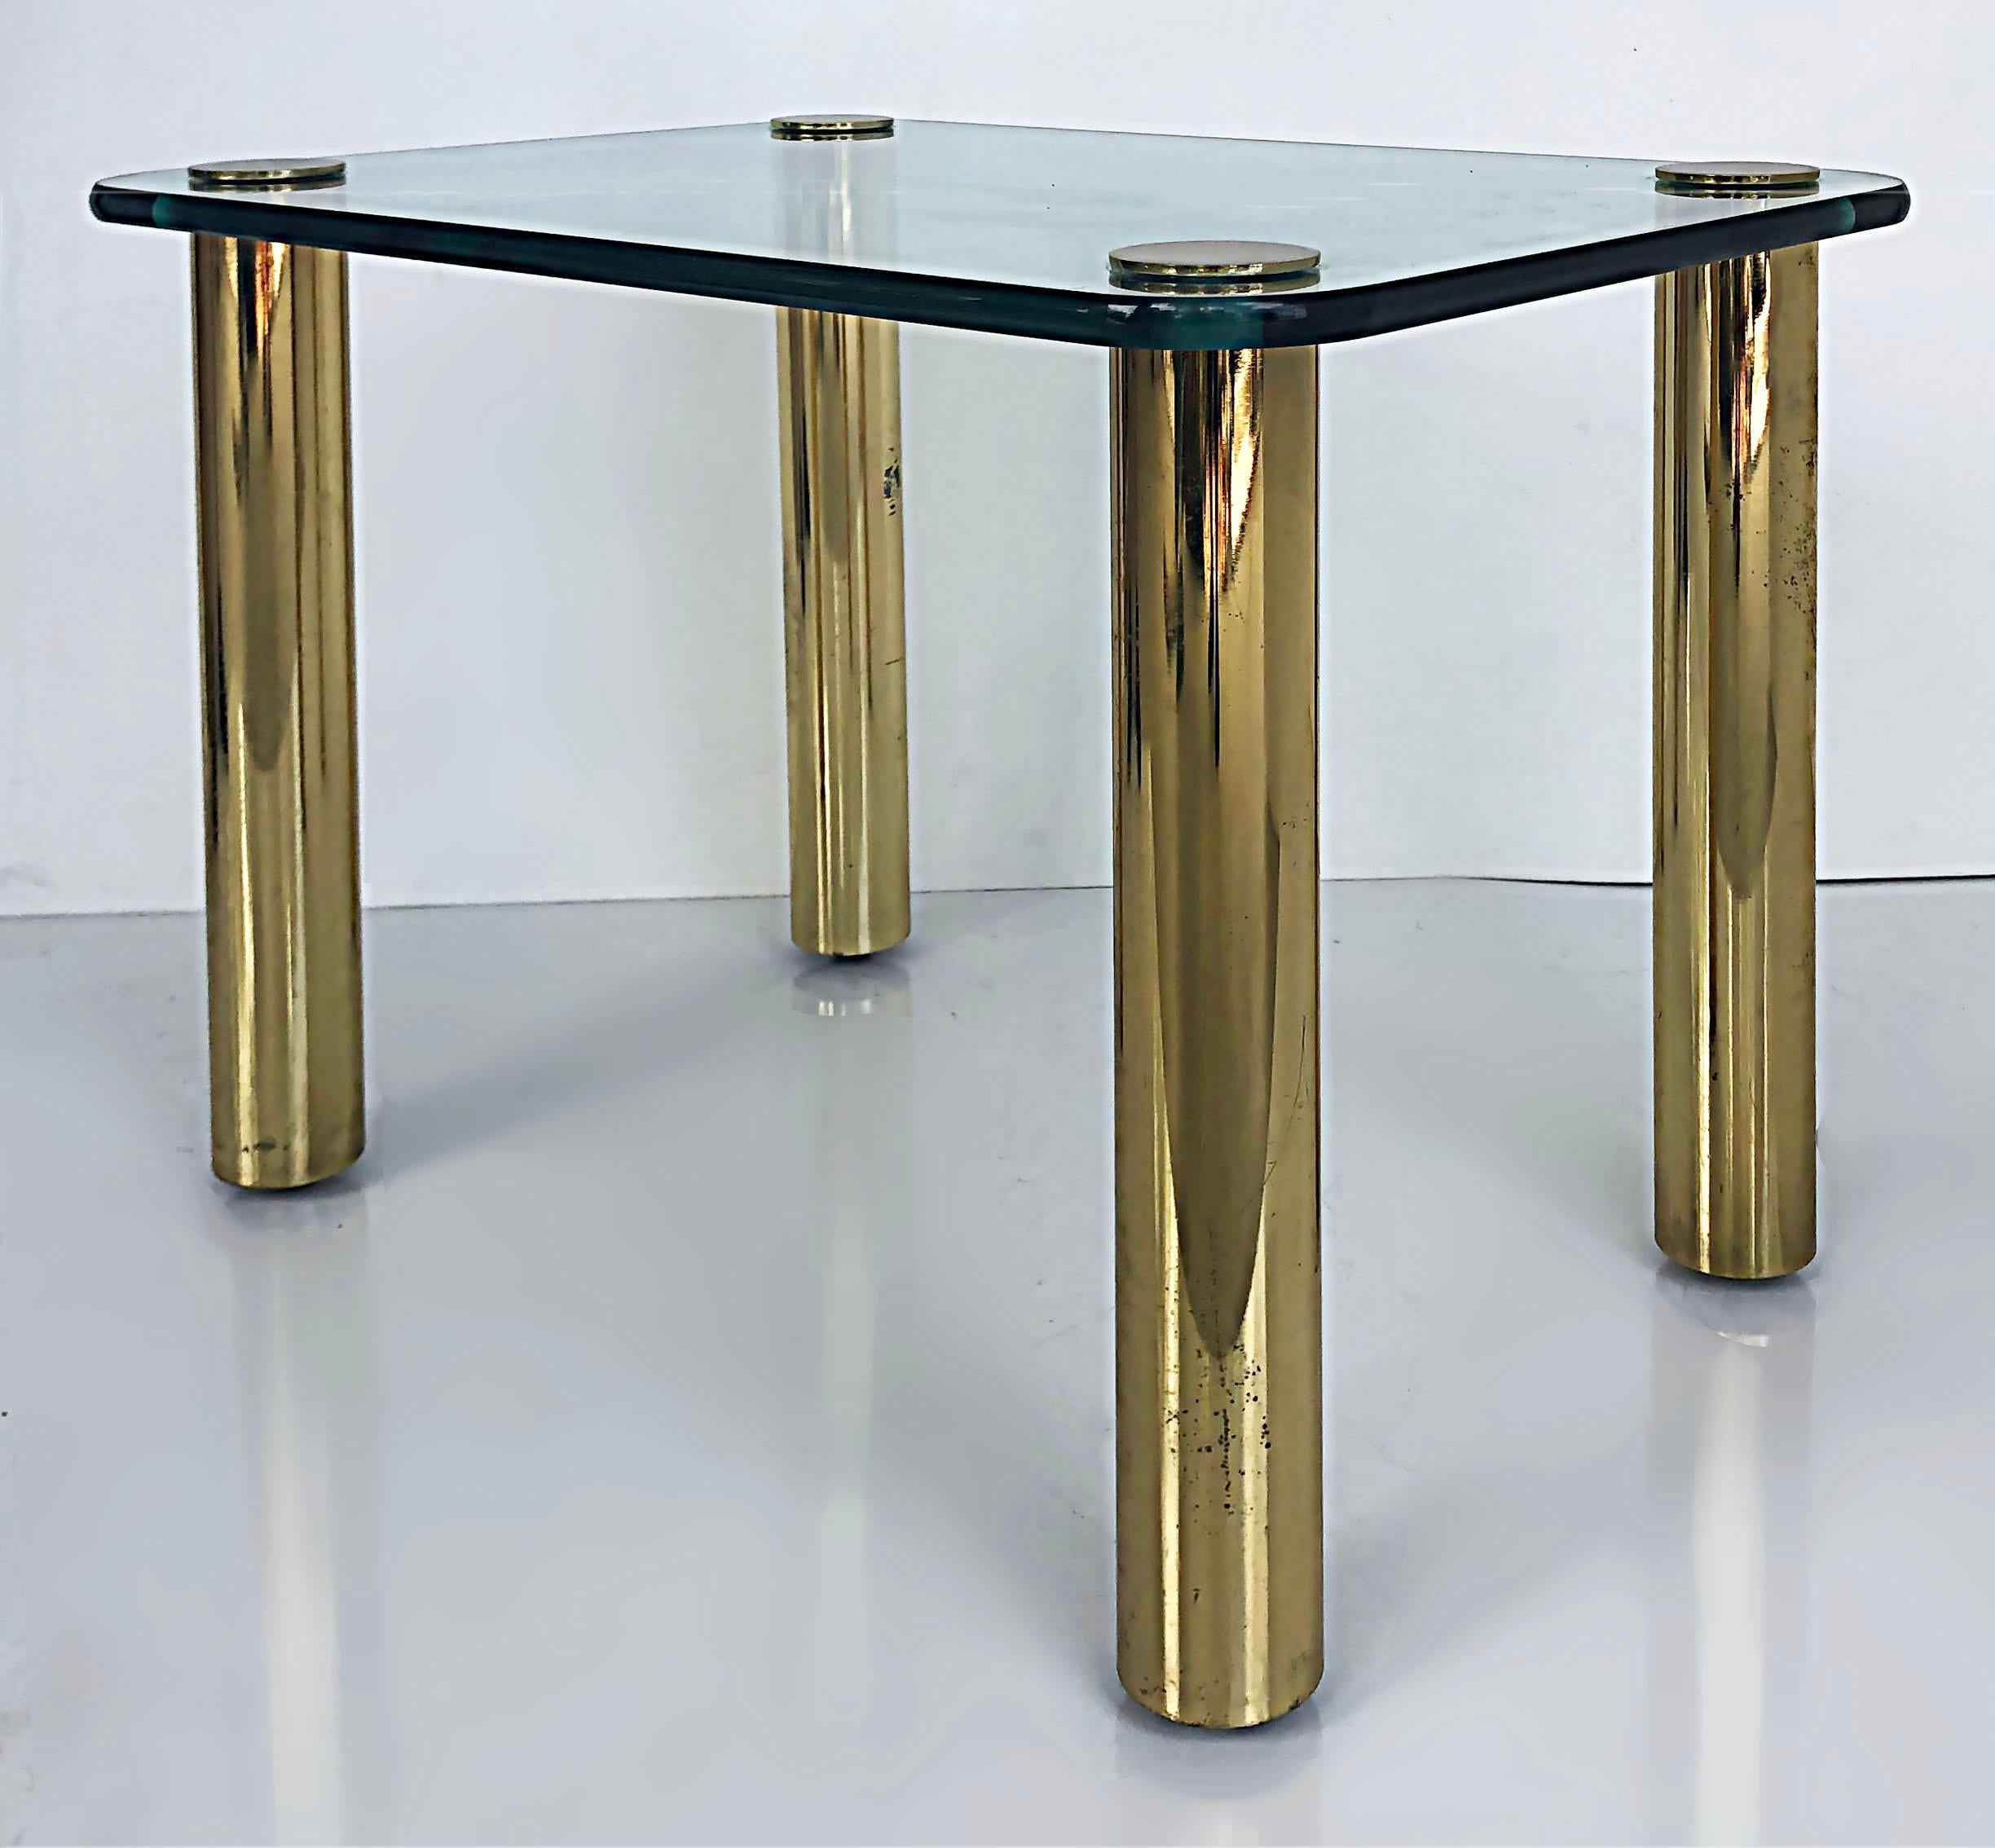 '80s Pace Collection Glass Top Side Table with Brass Legs

Offered for sale is a 1980s Pace Collection side table with a substantial glass top with rounded edges and rounded corners. The glass is supported by four brass legs that attach to the glass